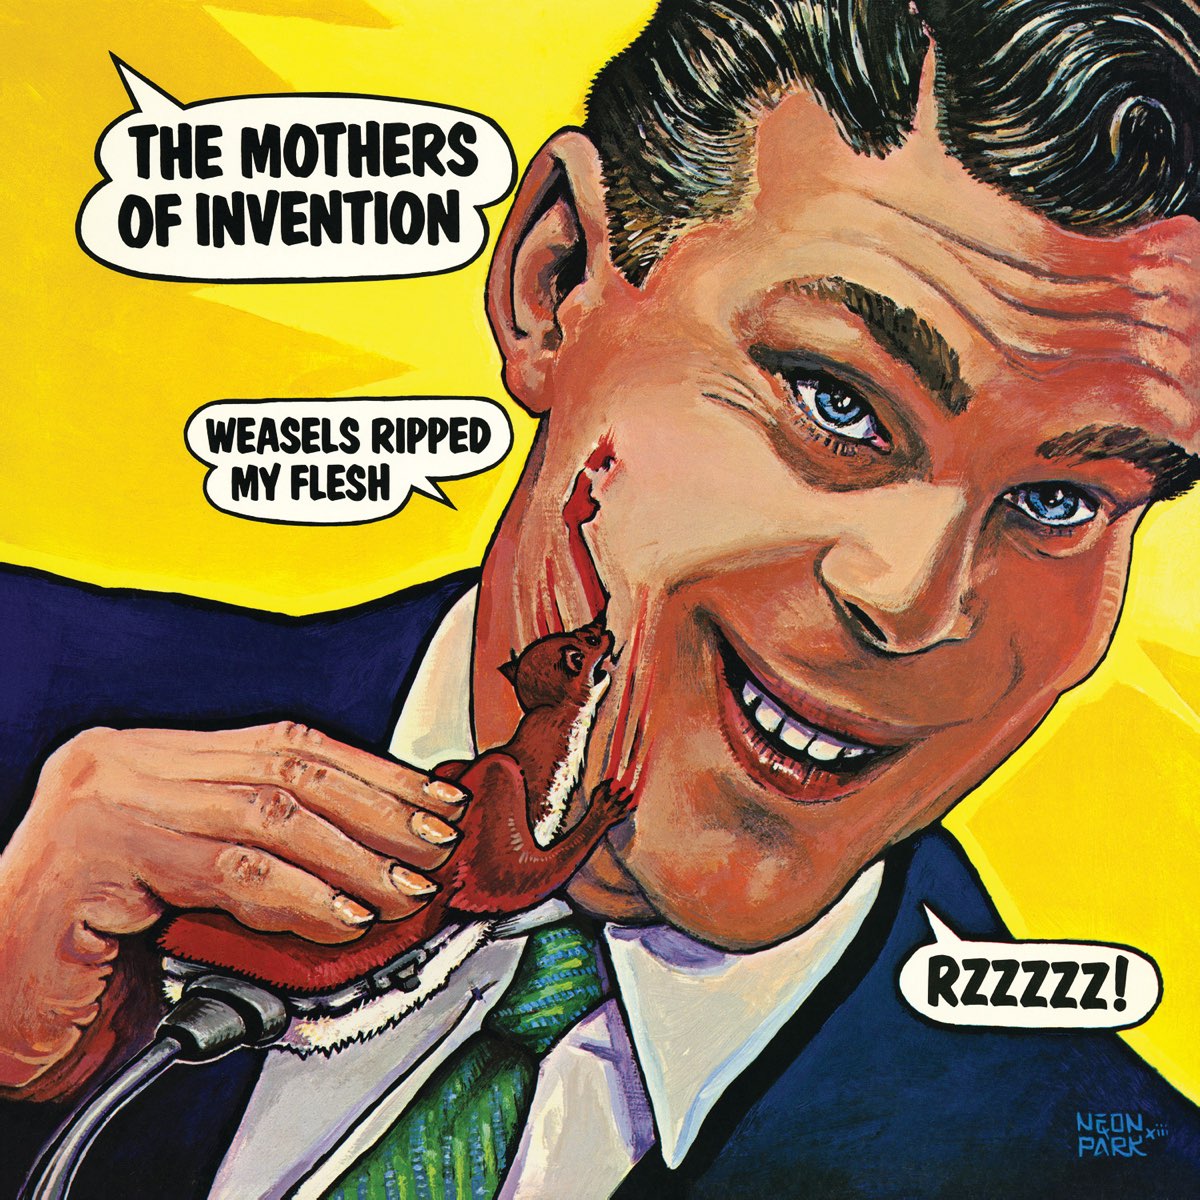 Zappa, Frank & The Mothers Of Invention: Weasels Ripped My Flesh (Vinyl LP)